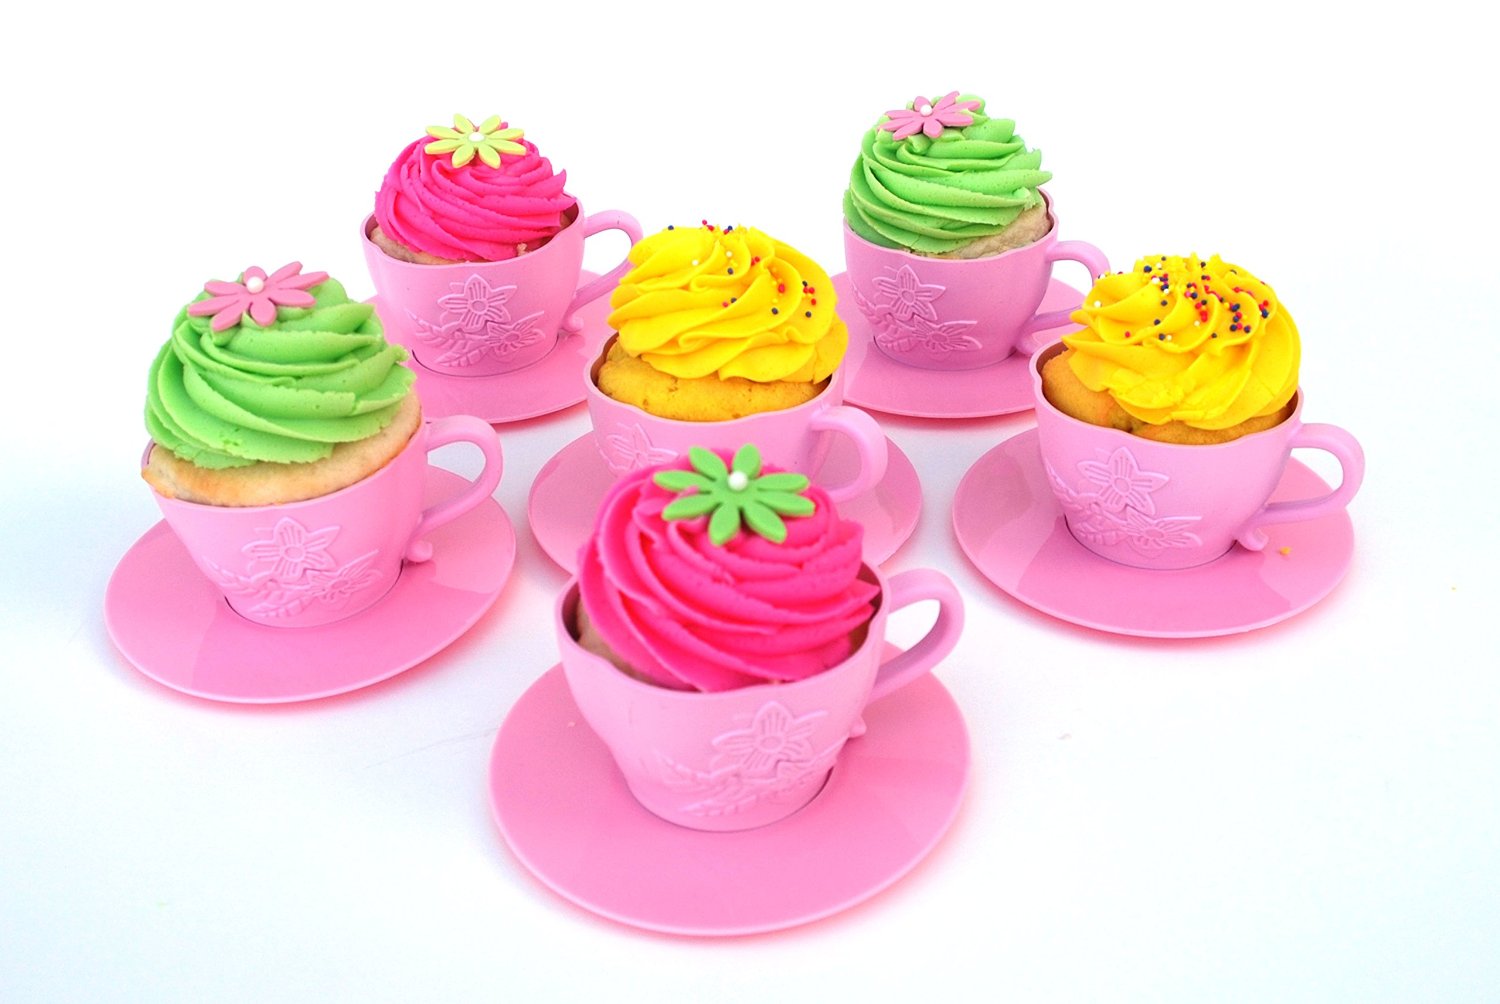 Silicone Teacup Cupcake Liners for Sweet Tea Parties